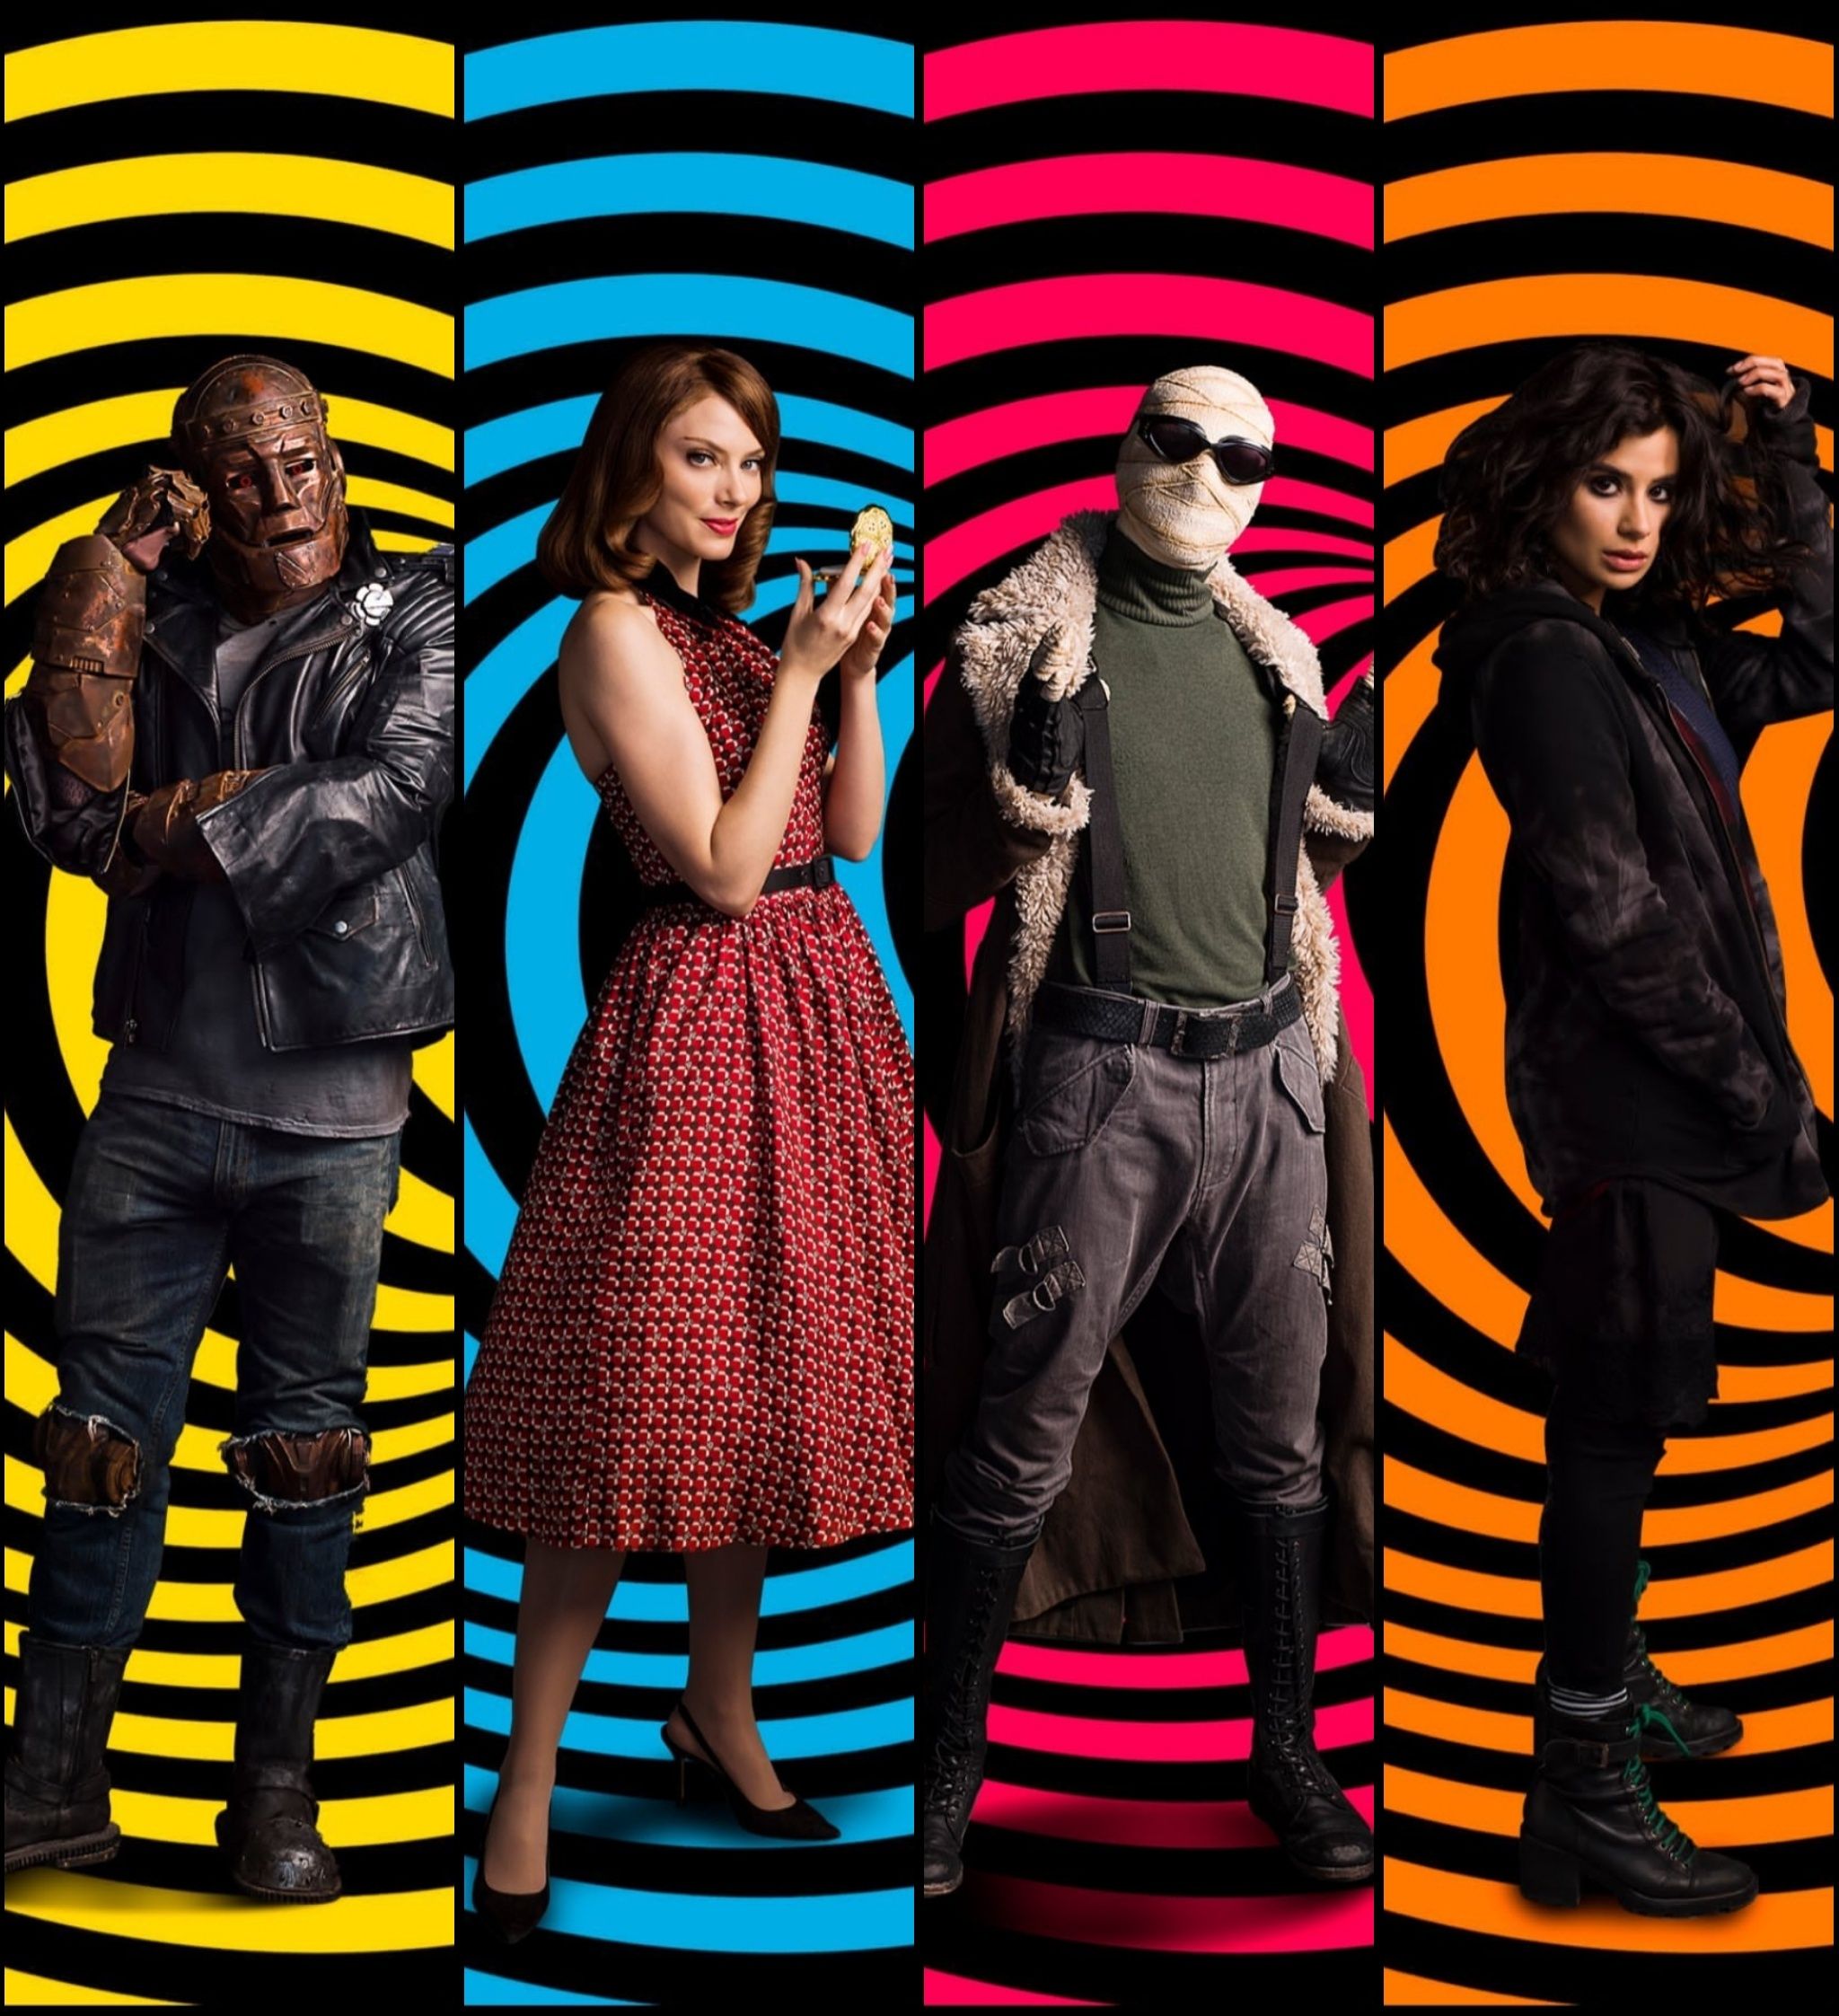 Stitched together the character wallpapers from Doom Patrol.